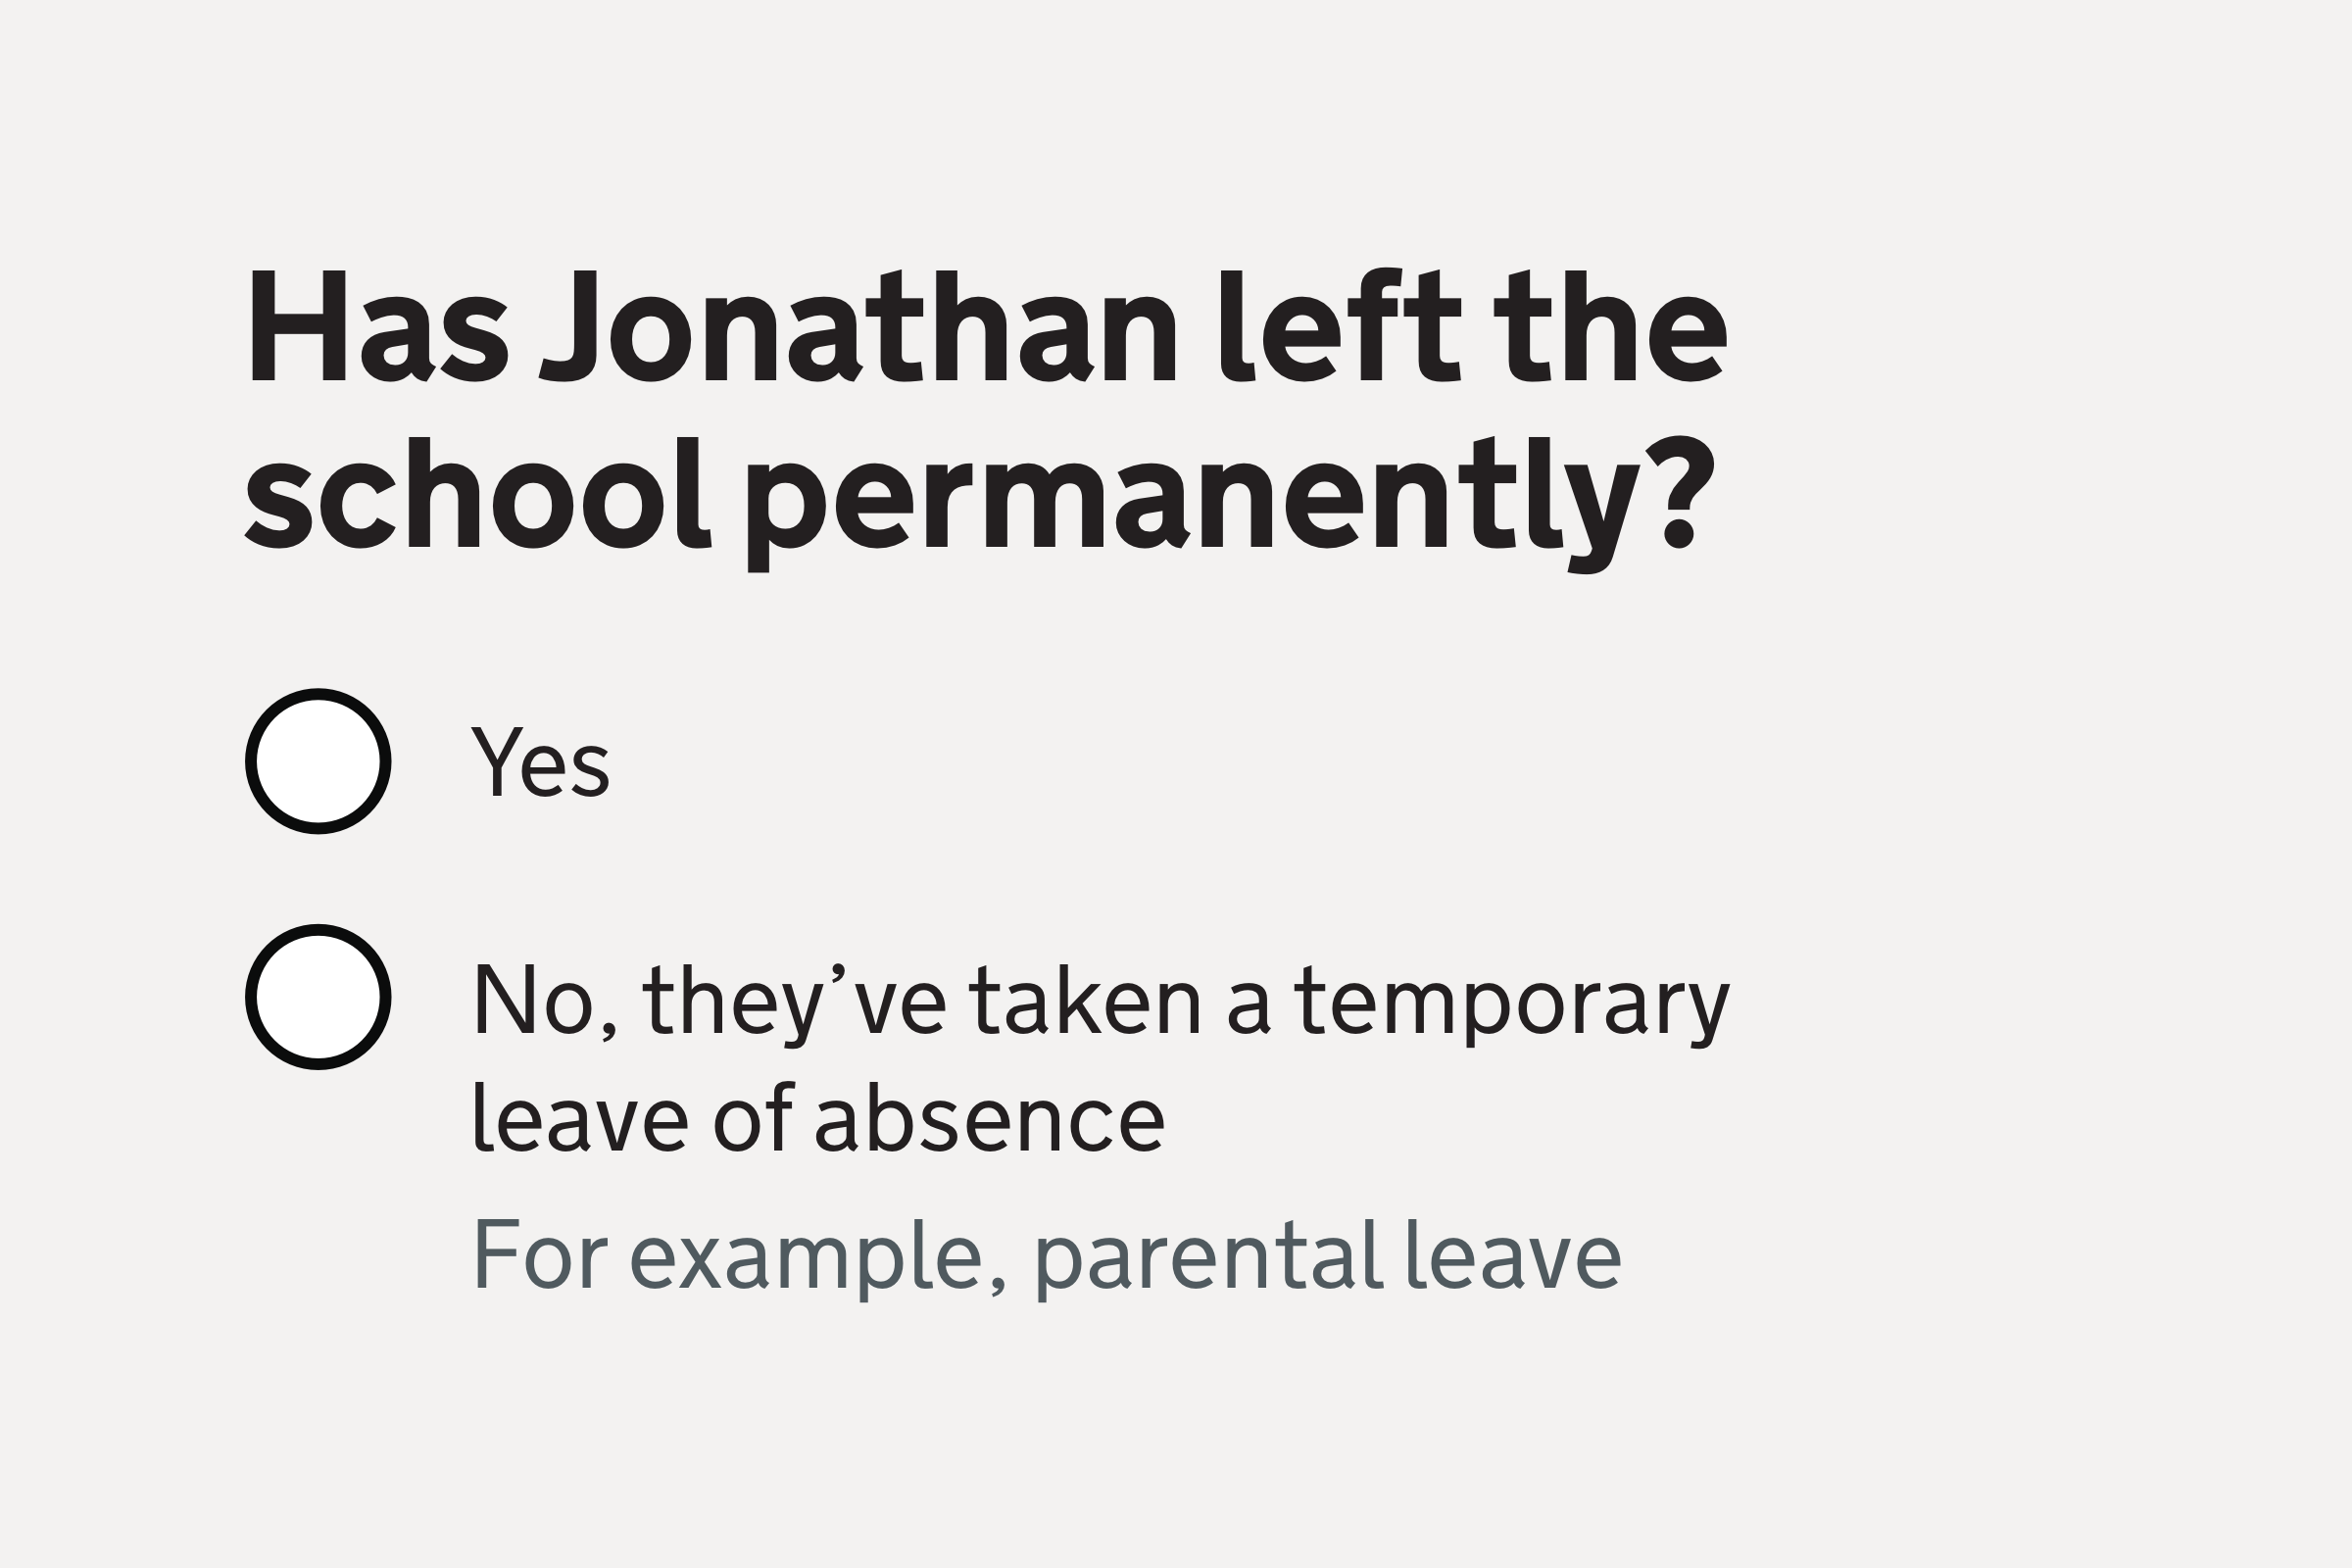 Illustration showing the question “Has Jonathan left the school permanently?” with the answers “Yes” or “No, they’ve taken a temporary leave of absence, for example parental leave” as radio options